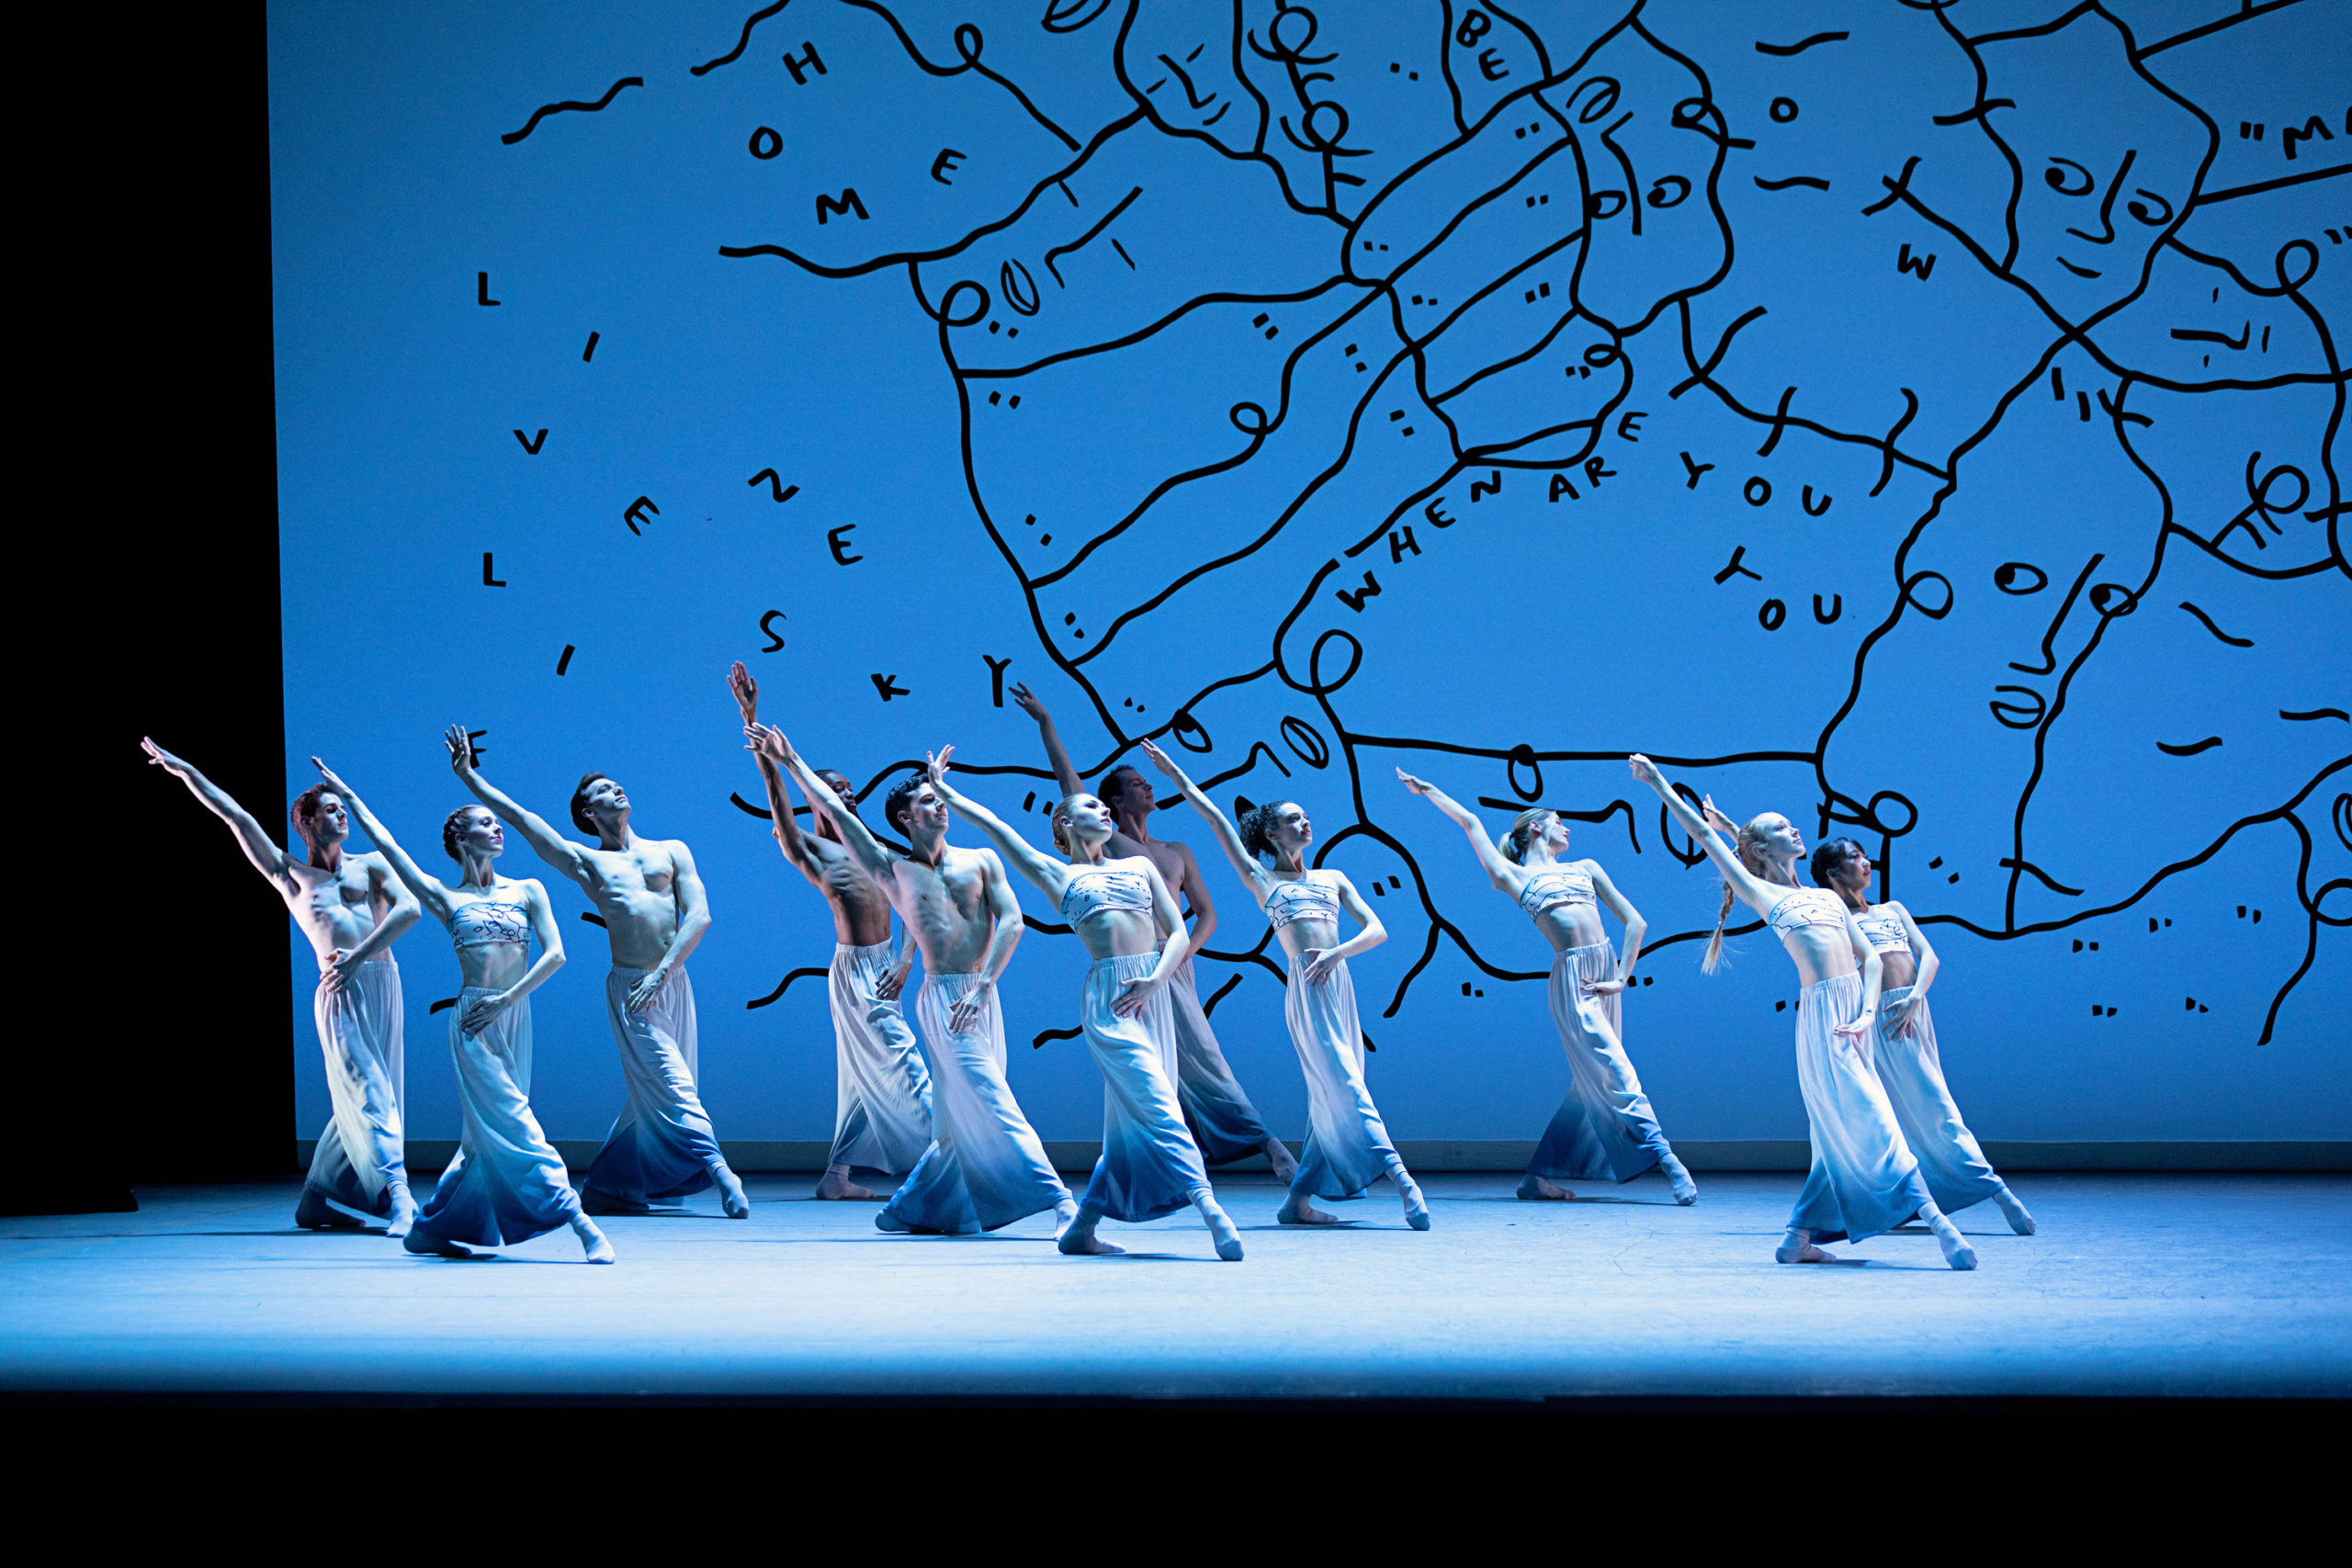 During a performance onstage, a group of 11 dancers pose in a dramatic plié tendu devant with their right leg extended and their right arm reaching high above their head and slightly behind them. Their left hand is crossed over to touch their right hip. The dancers wear long white and blue ombre skirts, and the women wear matching bandeaus. Behind them is a bright blue backdrop with a modern art design.